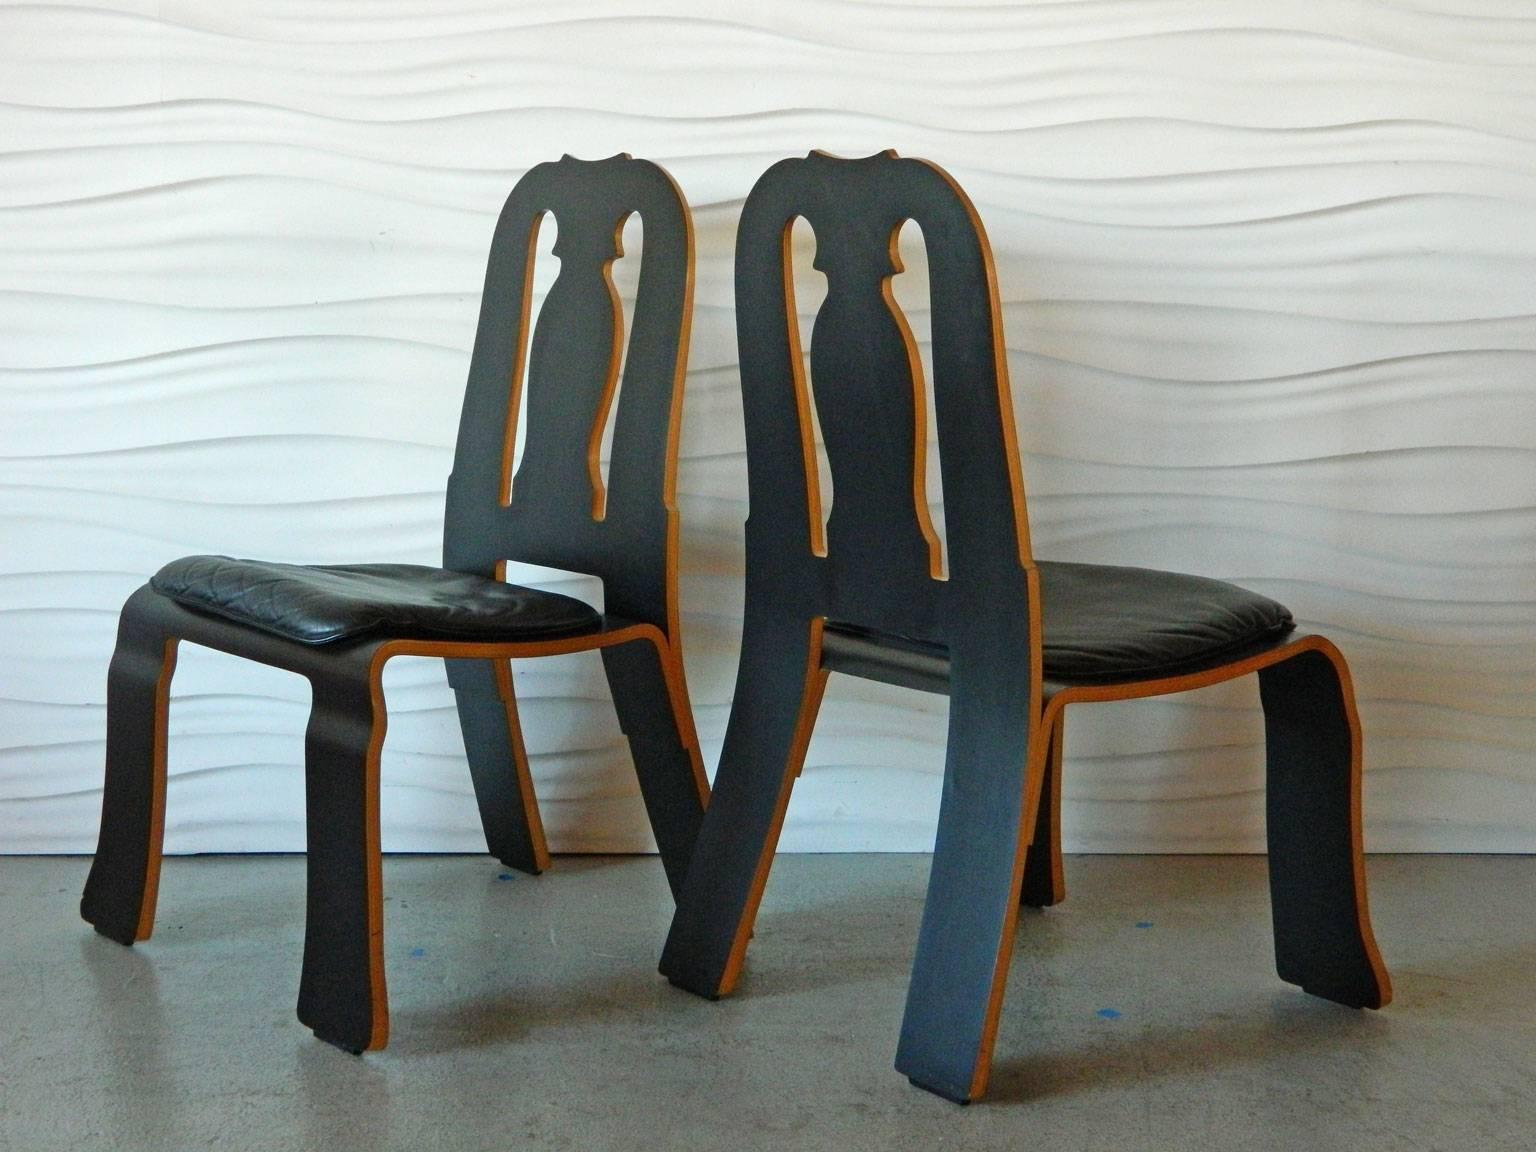 The Queen Anne chairs were designed by American architect Robert Venturi for Knoll. This pair was manufactured in 1986 and has black leather seat cushions.